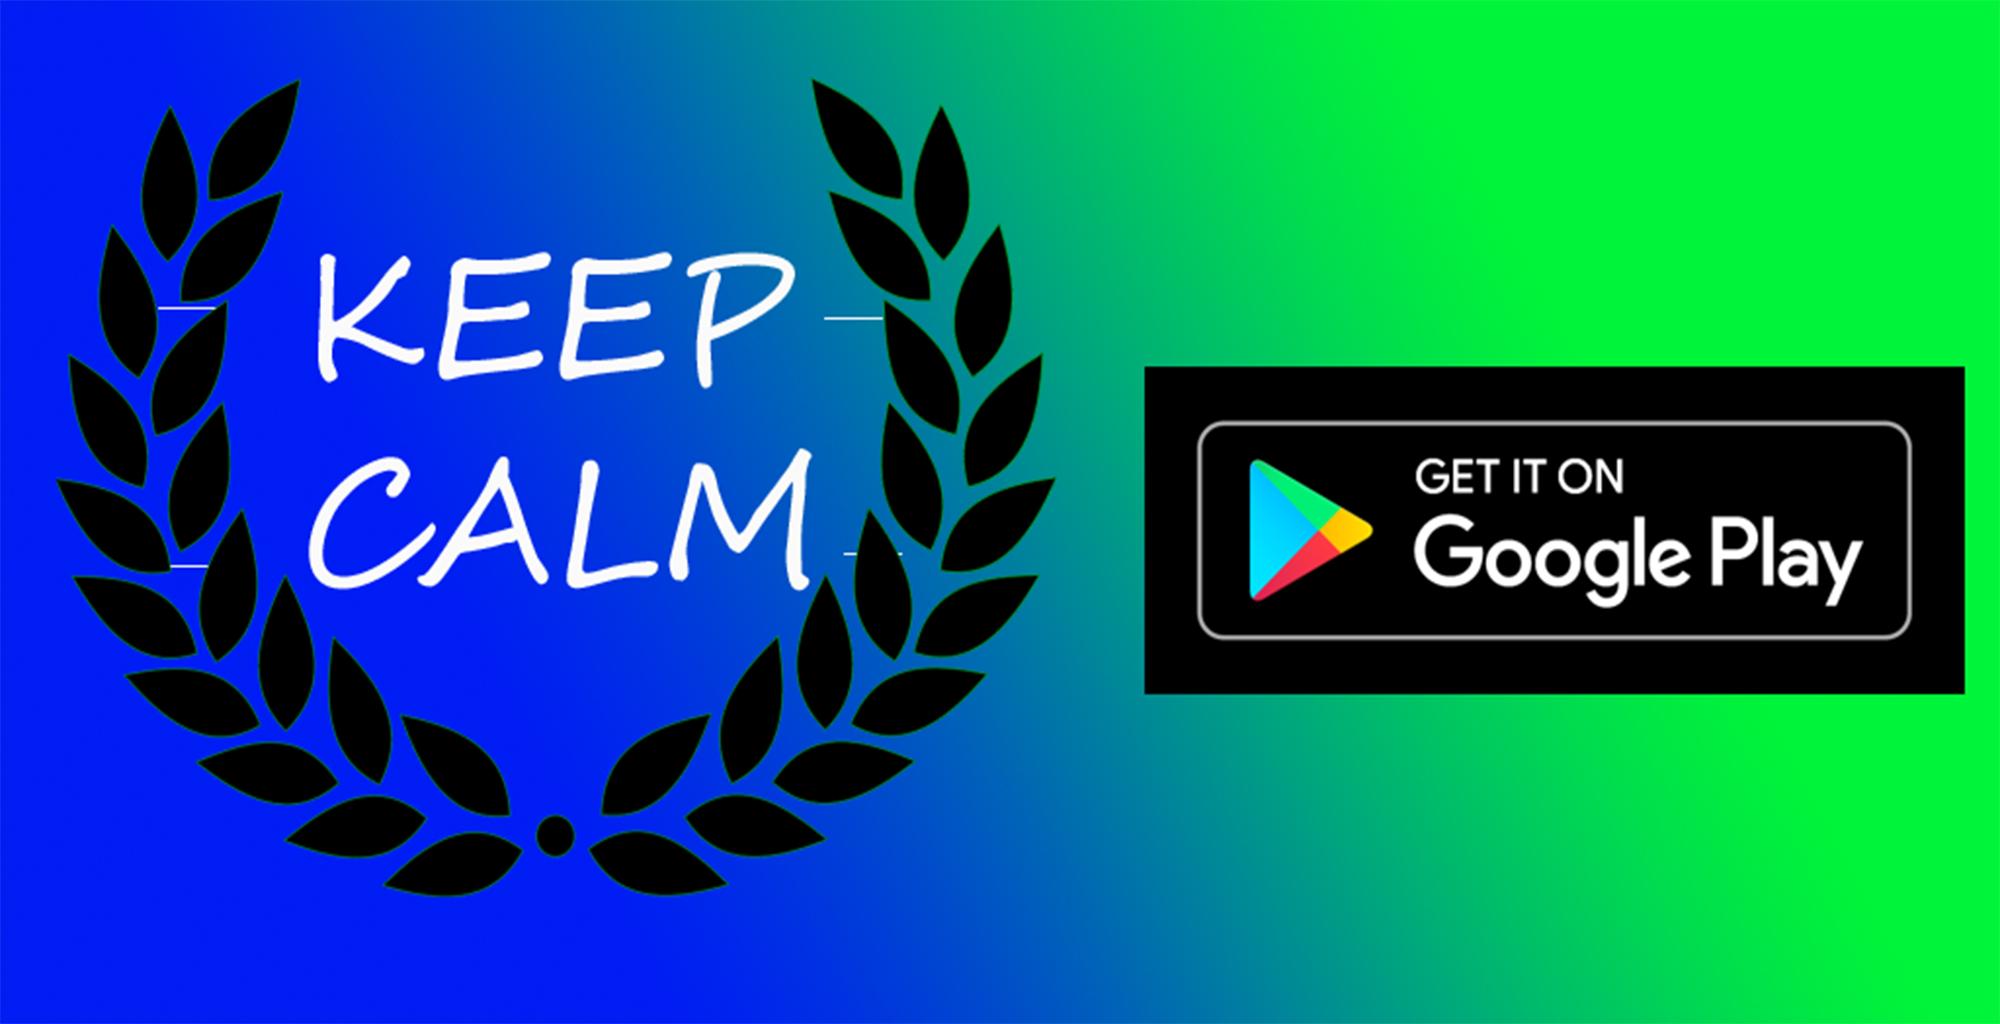 Calm Meditate Sleep Relax Free App 2020 For Android Apk Download